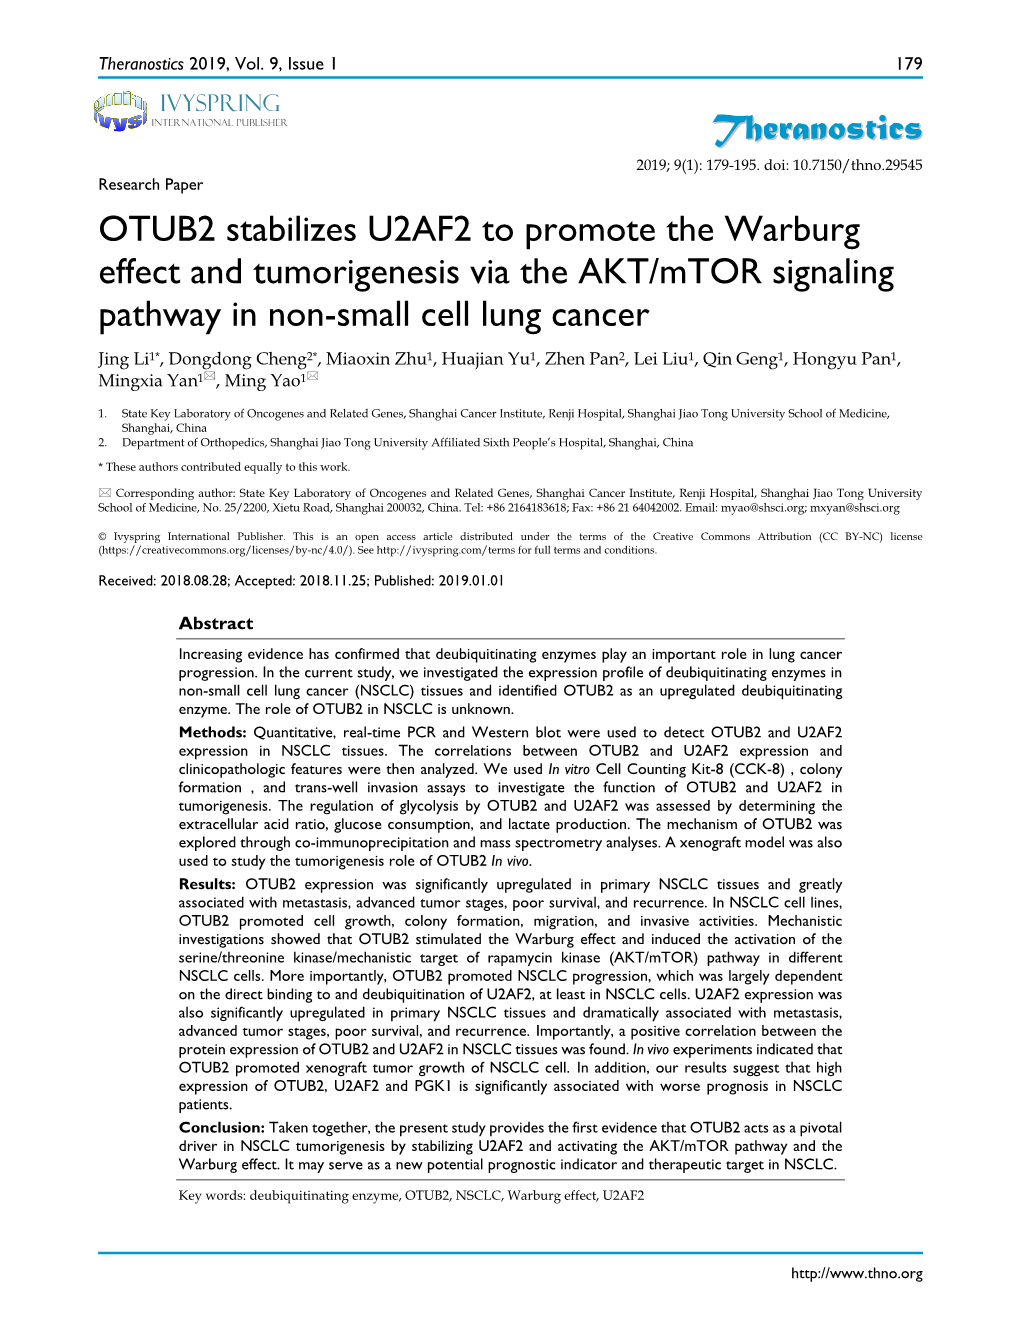 Theranostics OTUB2 Stabilizes U2AF2 to Promote the Warburg Effect and Tumorigenesis Via the AKT/Mtor Signaling Pathway in Non-Sm